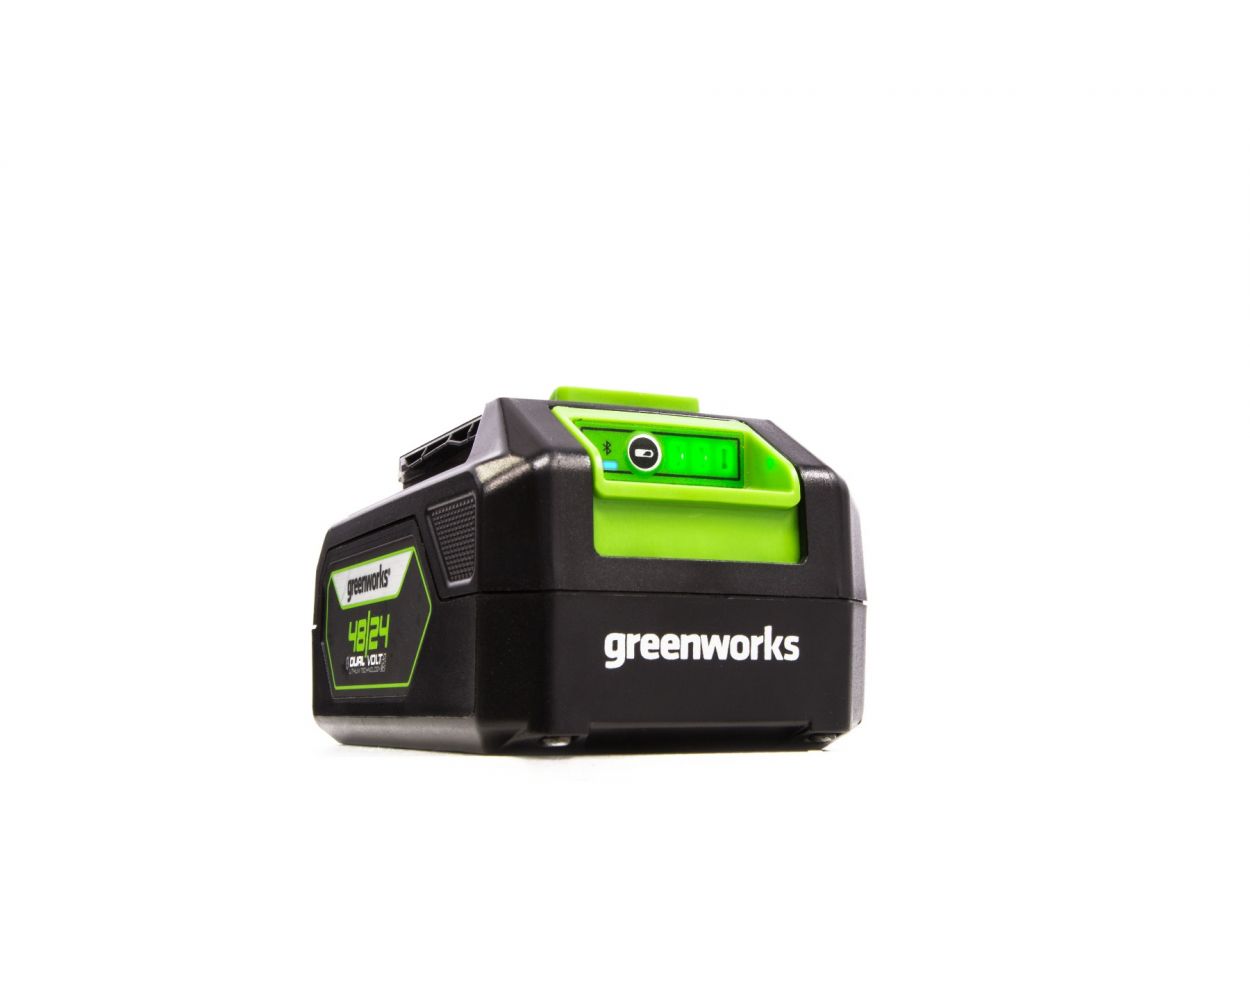 Greenworks Commercial #Product_name#